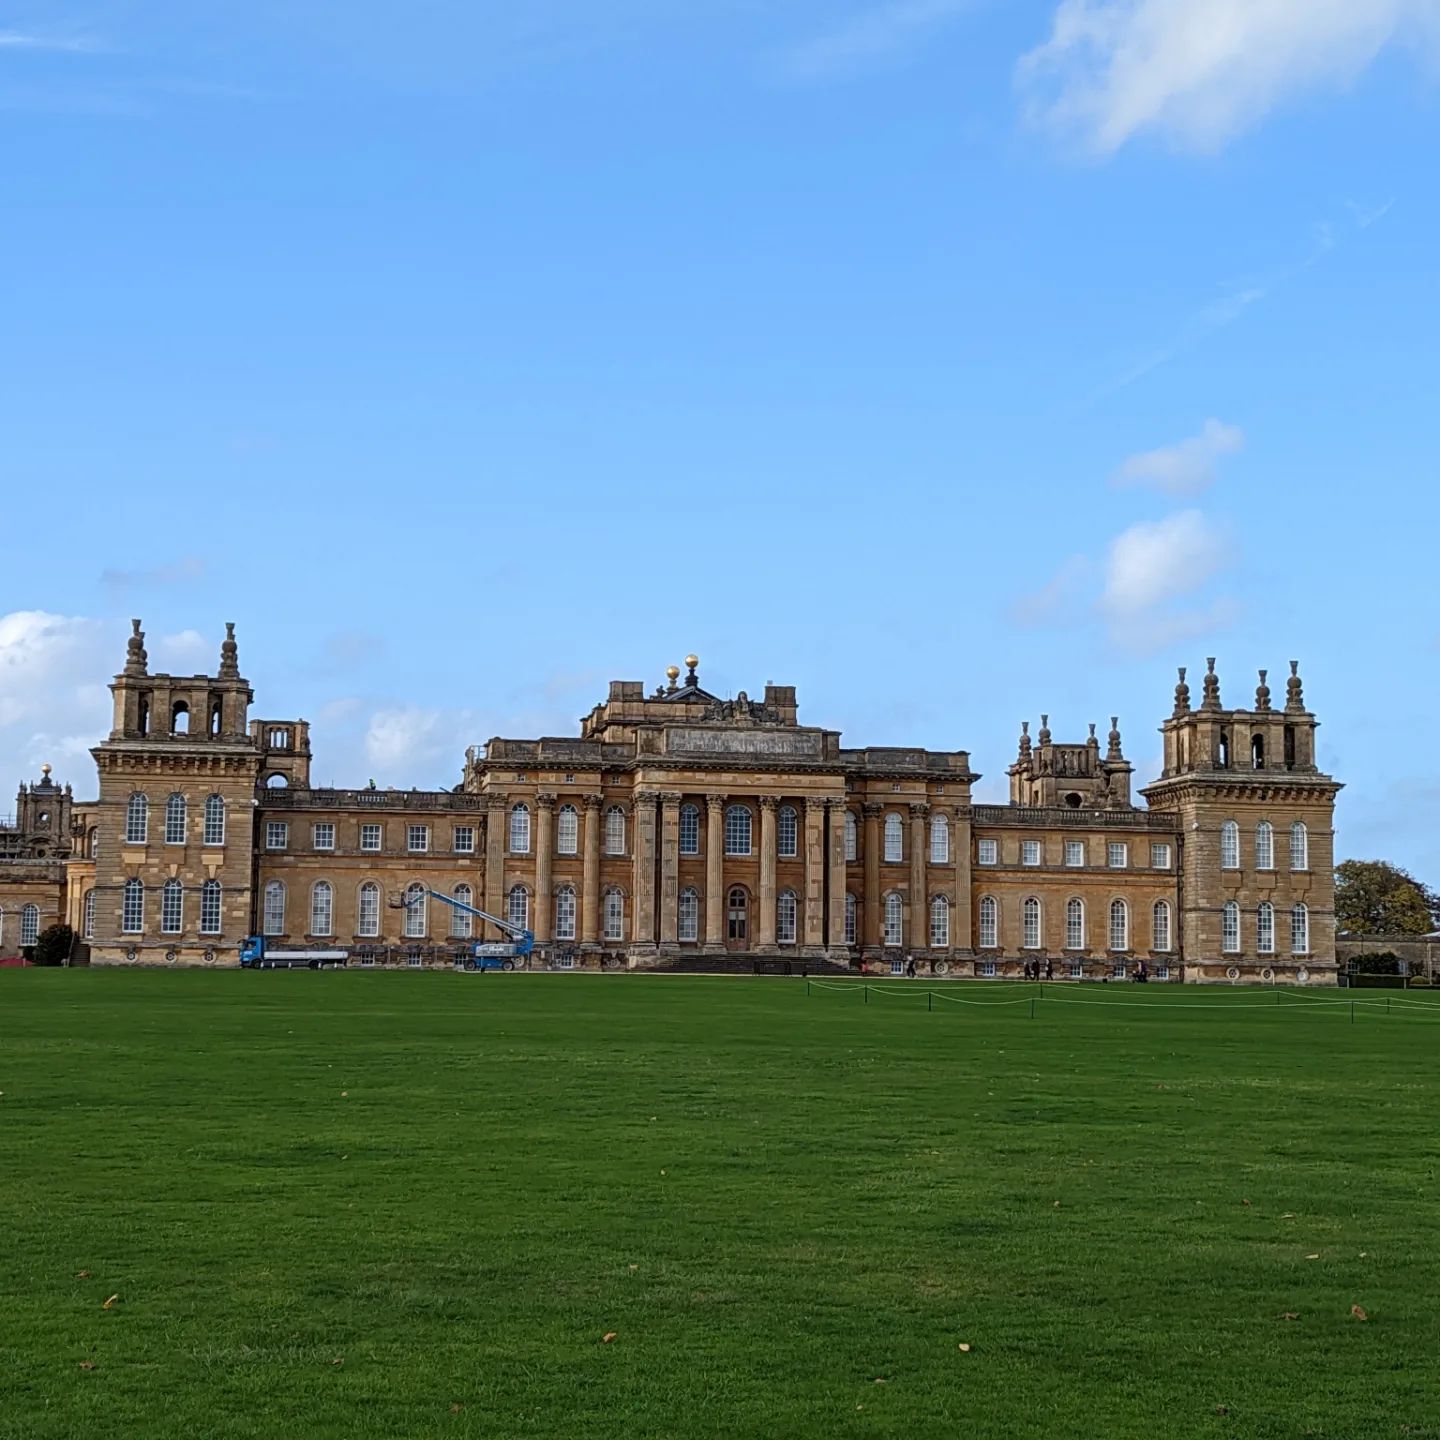 Beautiful Blenheim PalaceOn a sunny autumnal day looking all spooky for Halloween#blenheim #blenheimpalace #autumn #autumnal #halloween